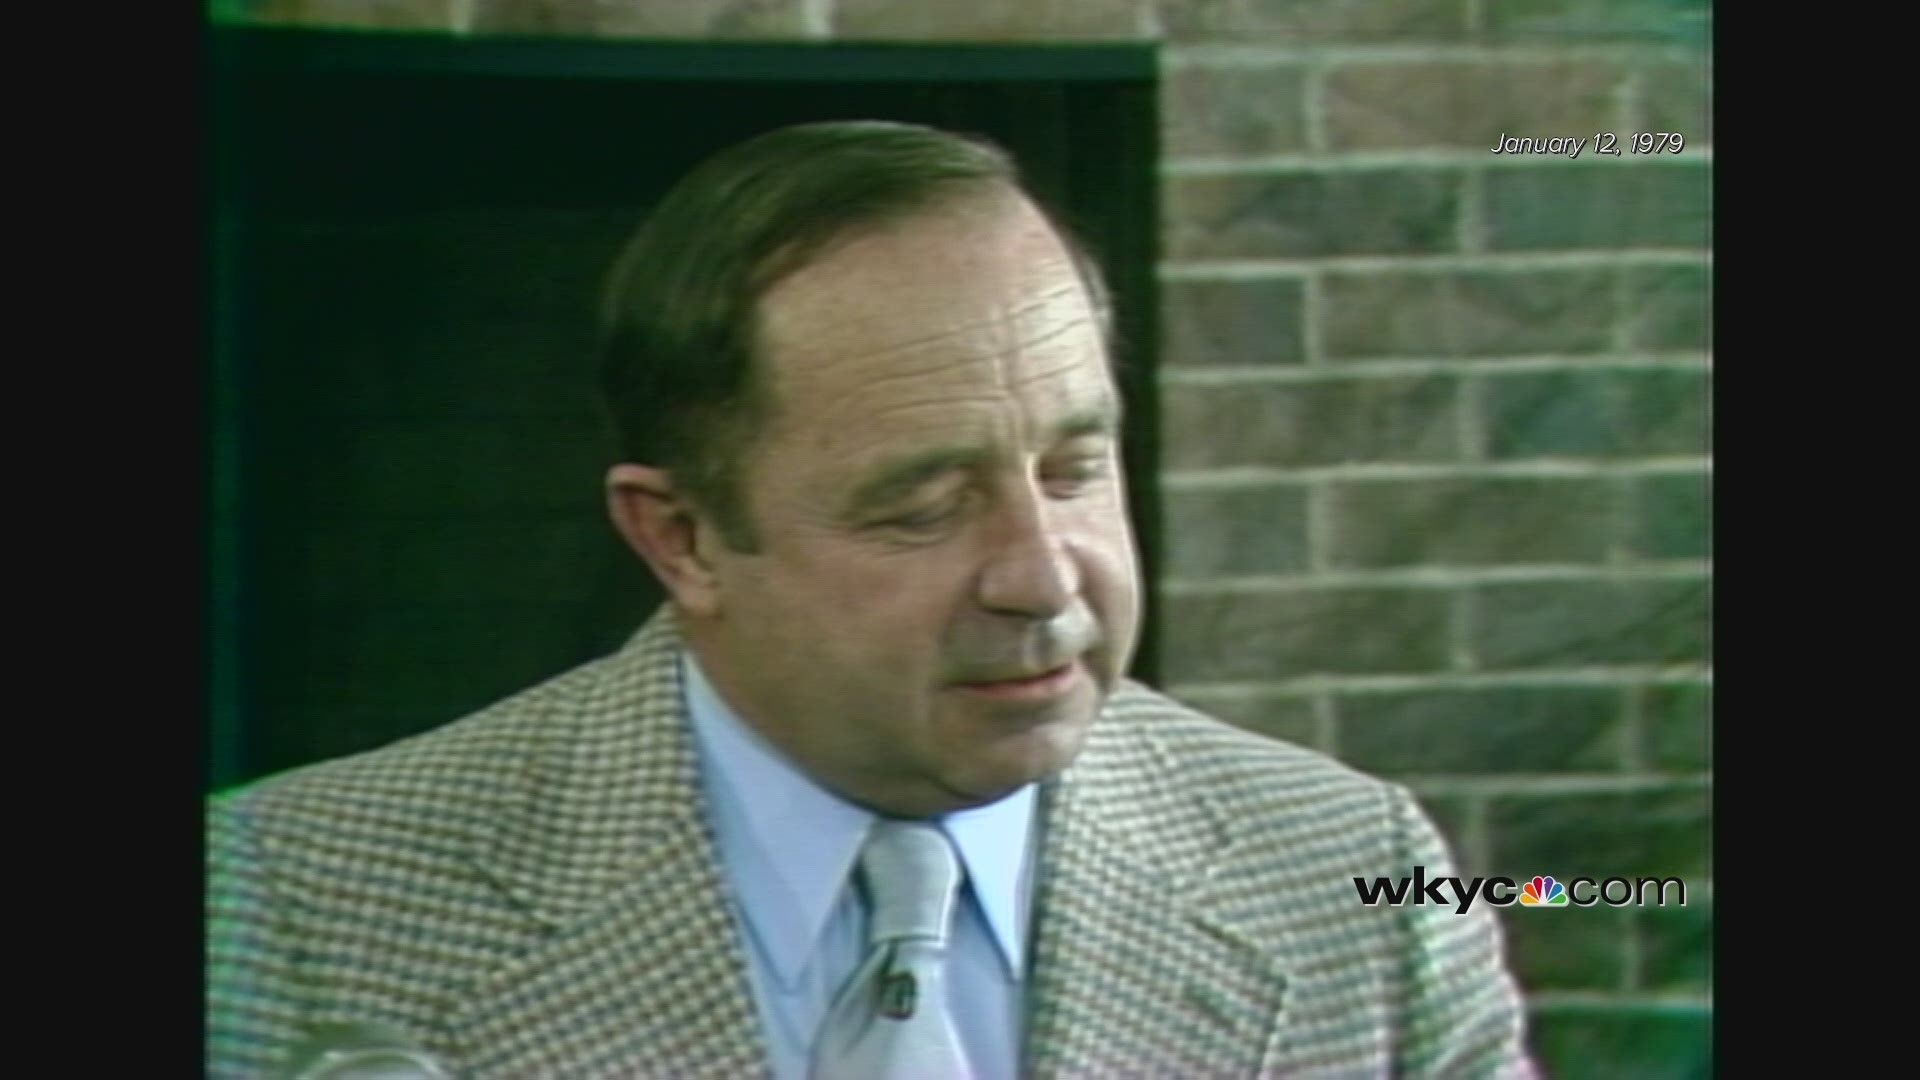 From the WKYC archives: Earle Bruce introduced as Ohio State head football coach in 1979